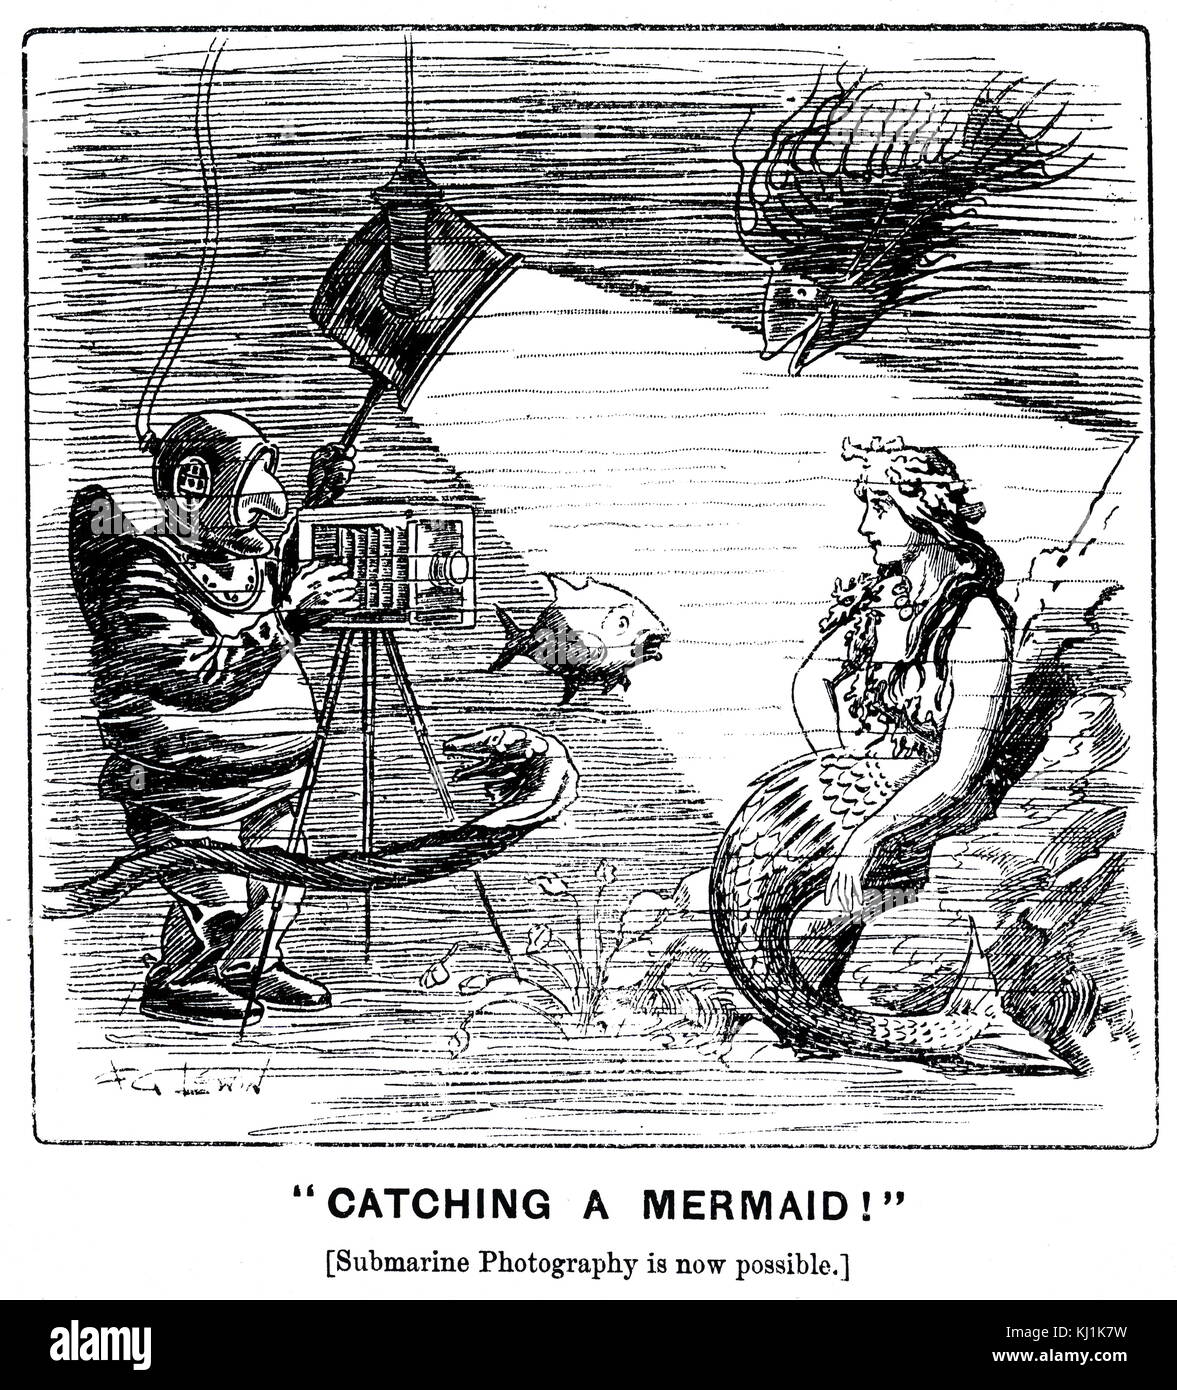 Cartoon marking the announcement of submarine photography. Dated 20th Century Stock Photo